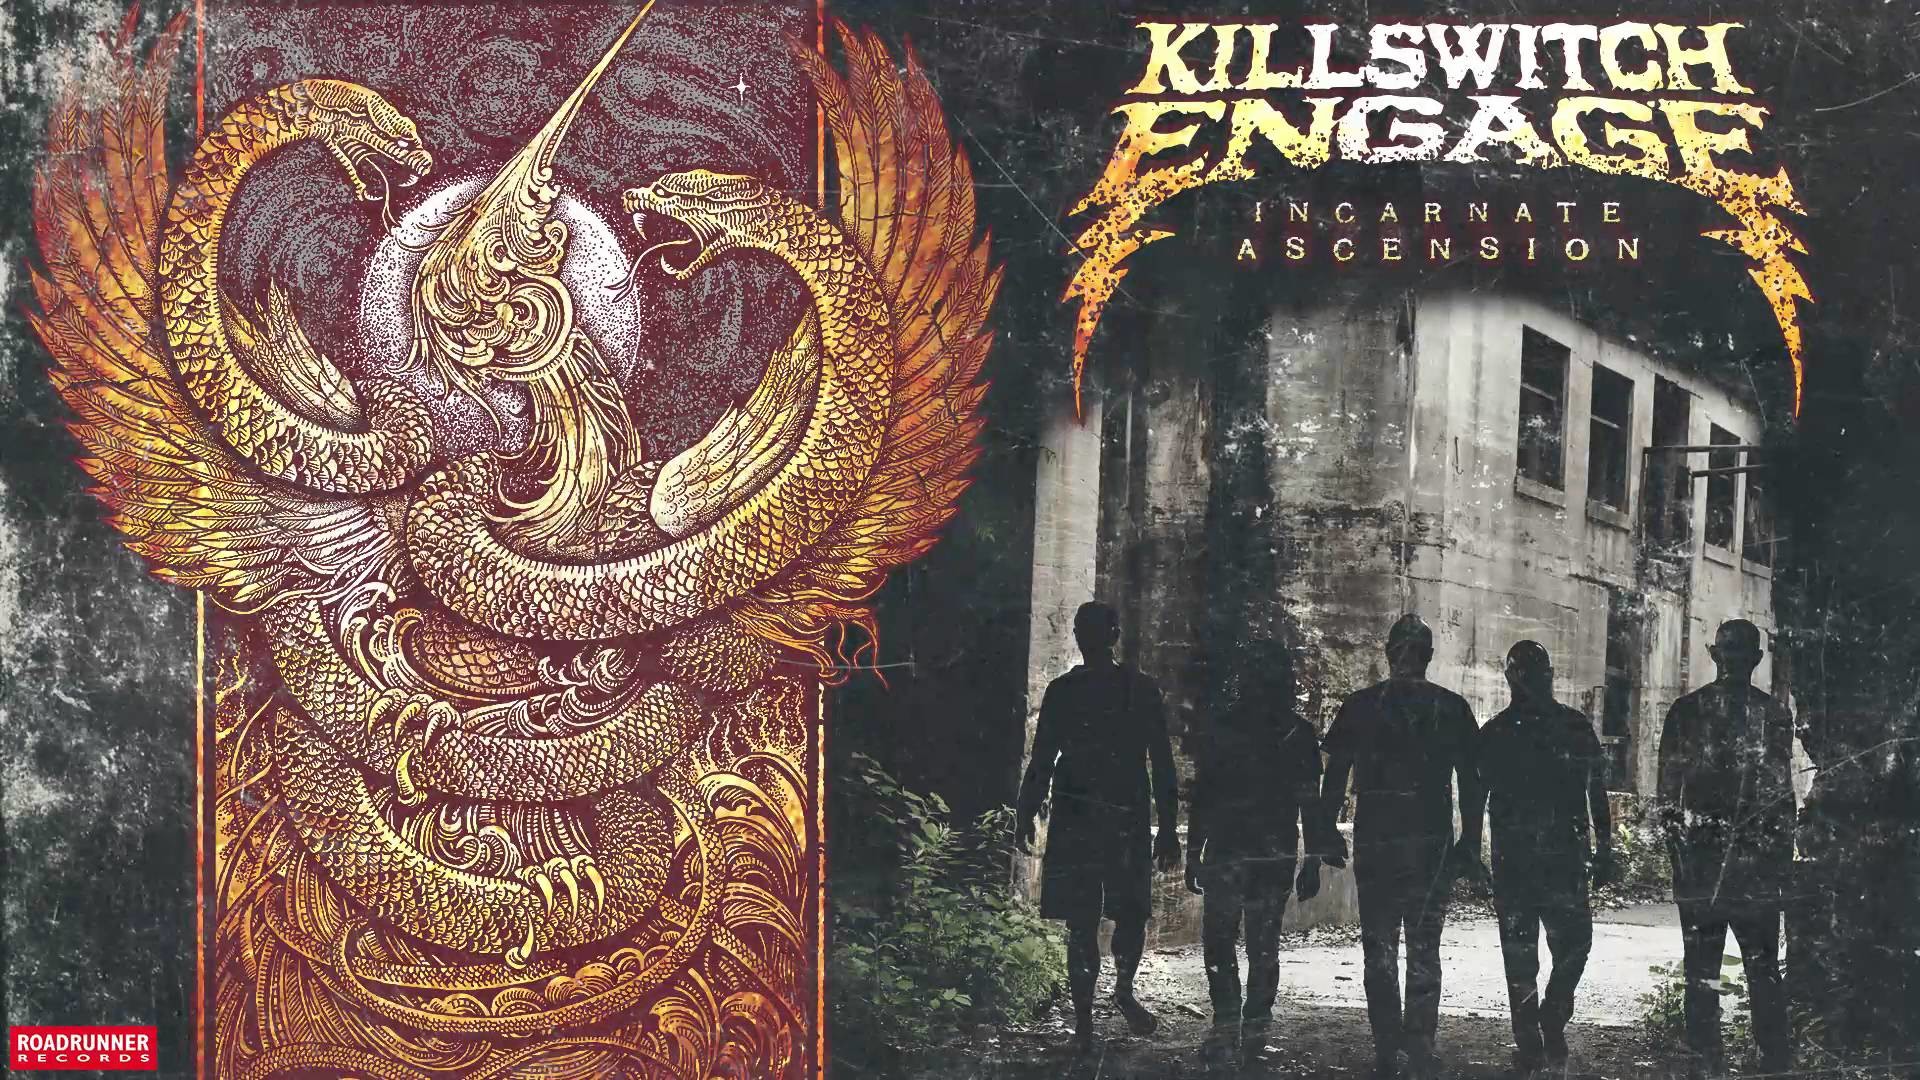 1920x1080 Killswitch Engage - Ascension (Audio)